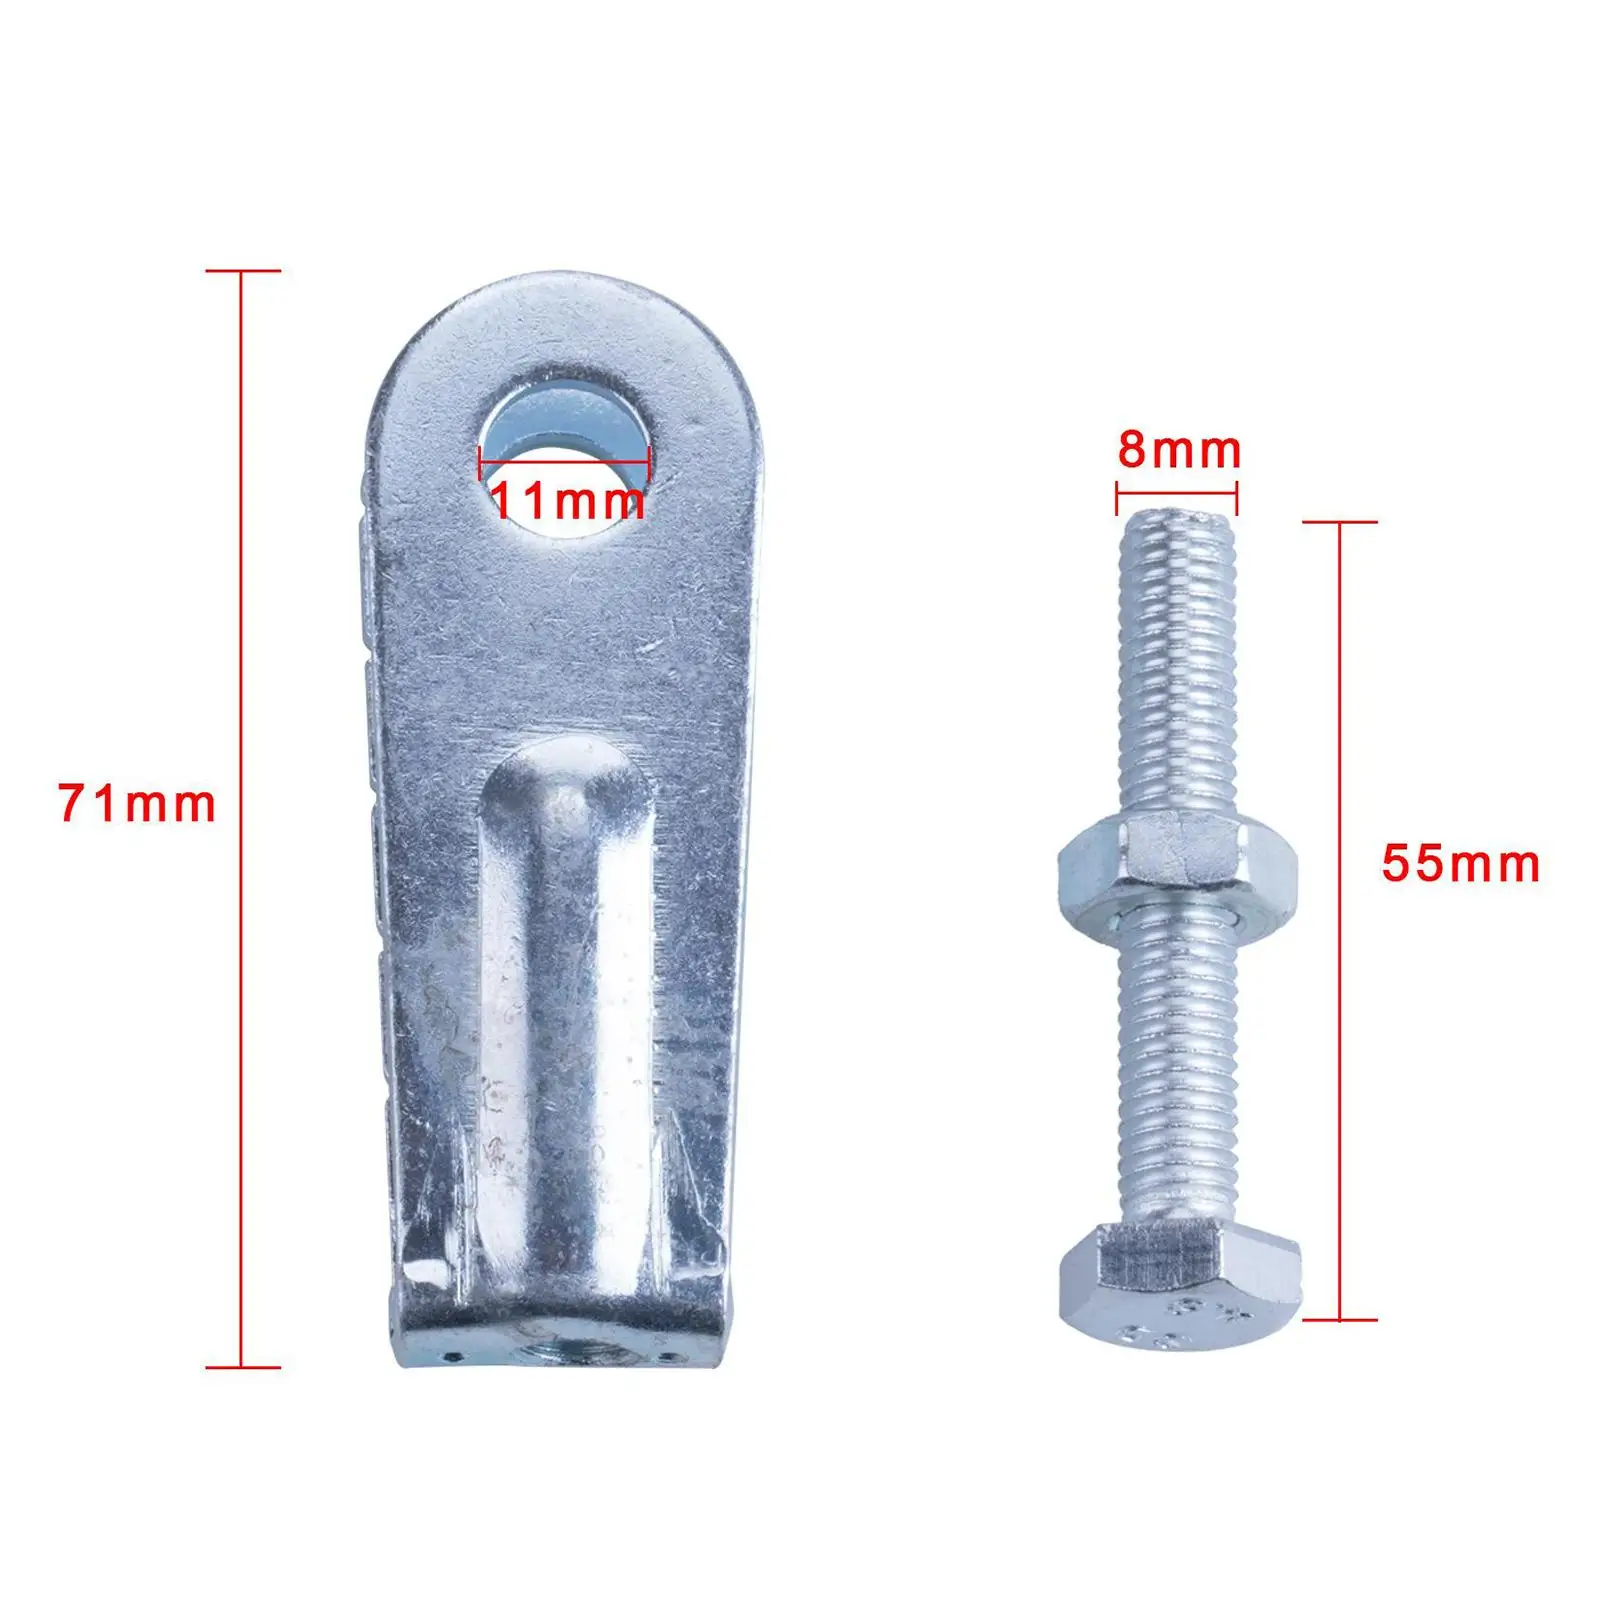 2pcs Wheel Chain Puller Adjusters for ATV 350